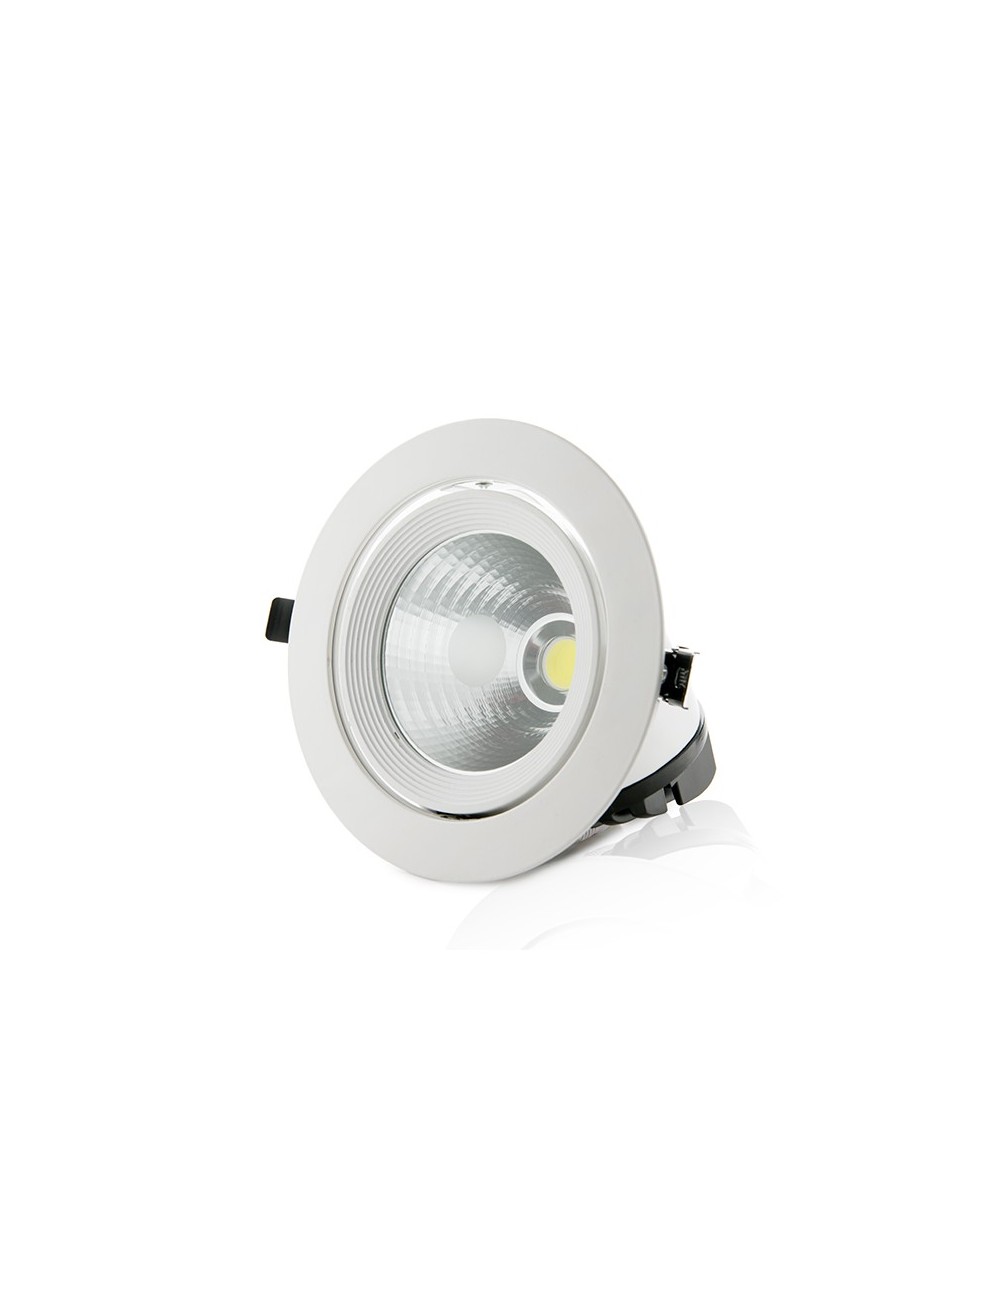 Downlight LED 40W 3.200Lm 6000ºK Rond Orientable 40.000H [HO-COB-OR-40W-CW]